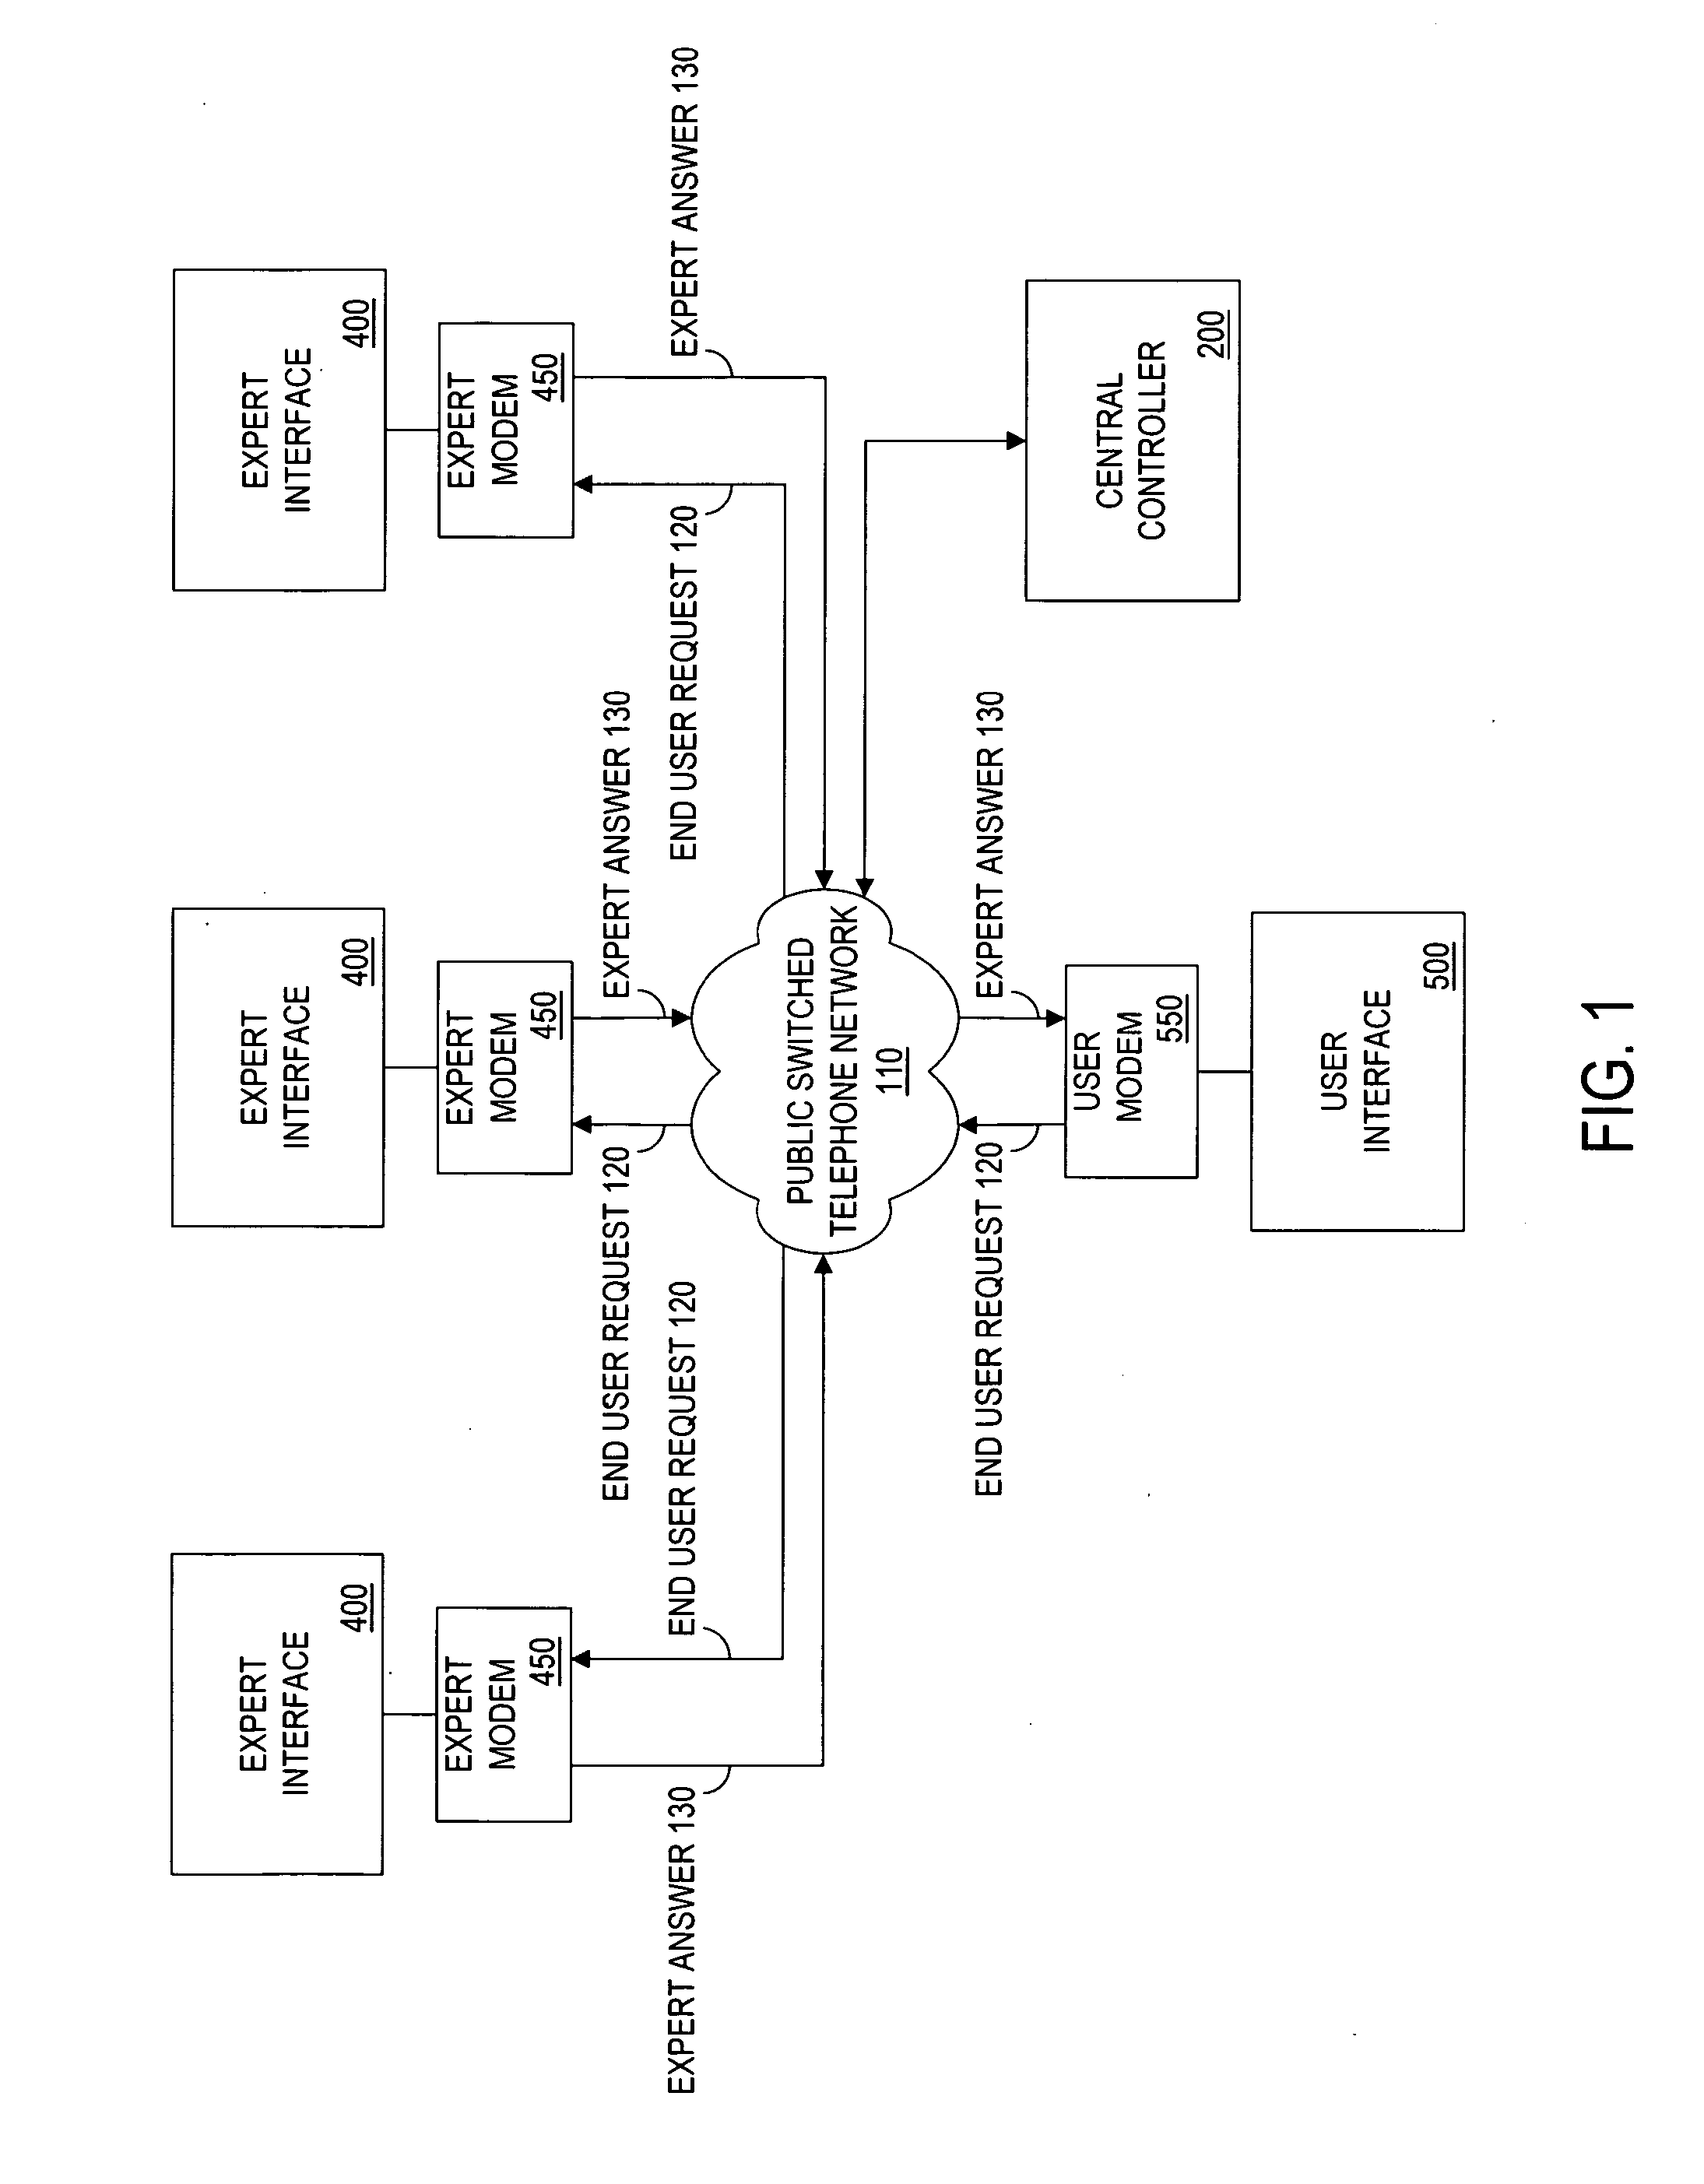 Method and apparatus for a cryptographically-assisted commerical network system designed to facilitate and support expert-based commerce